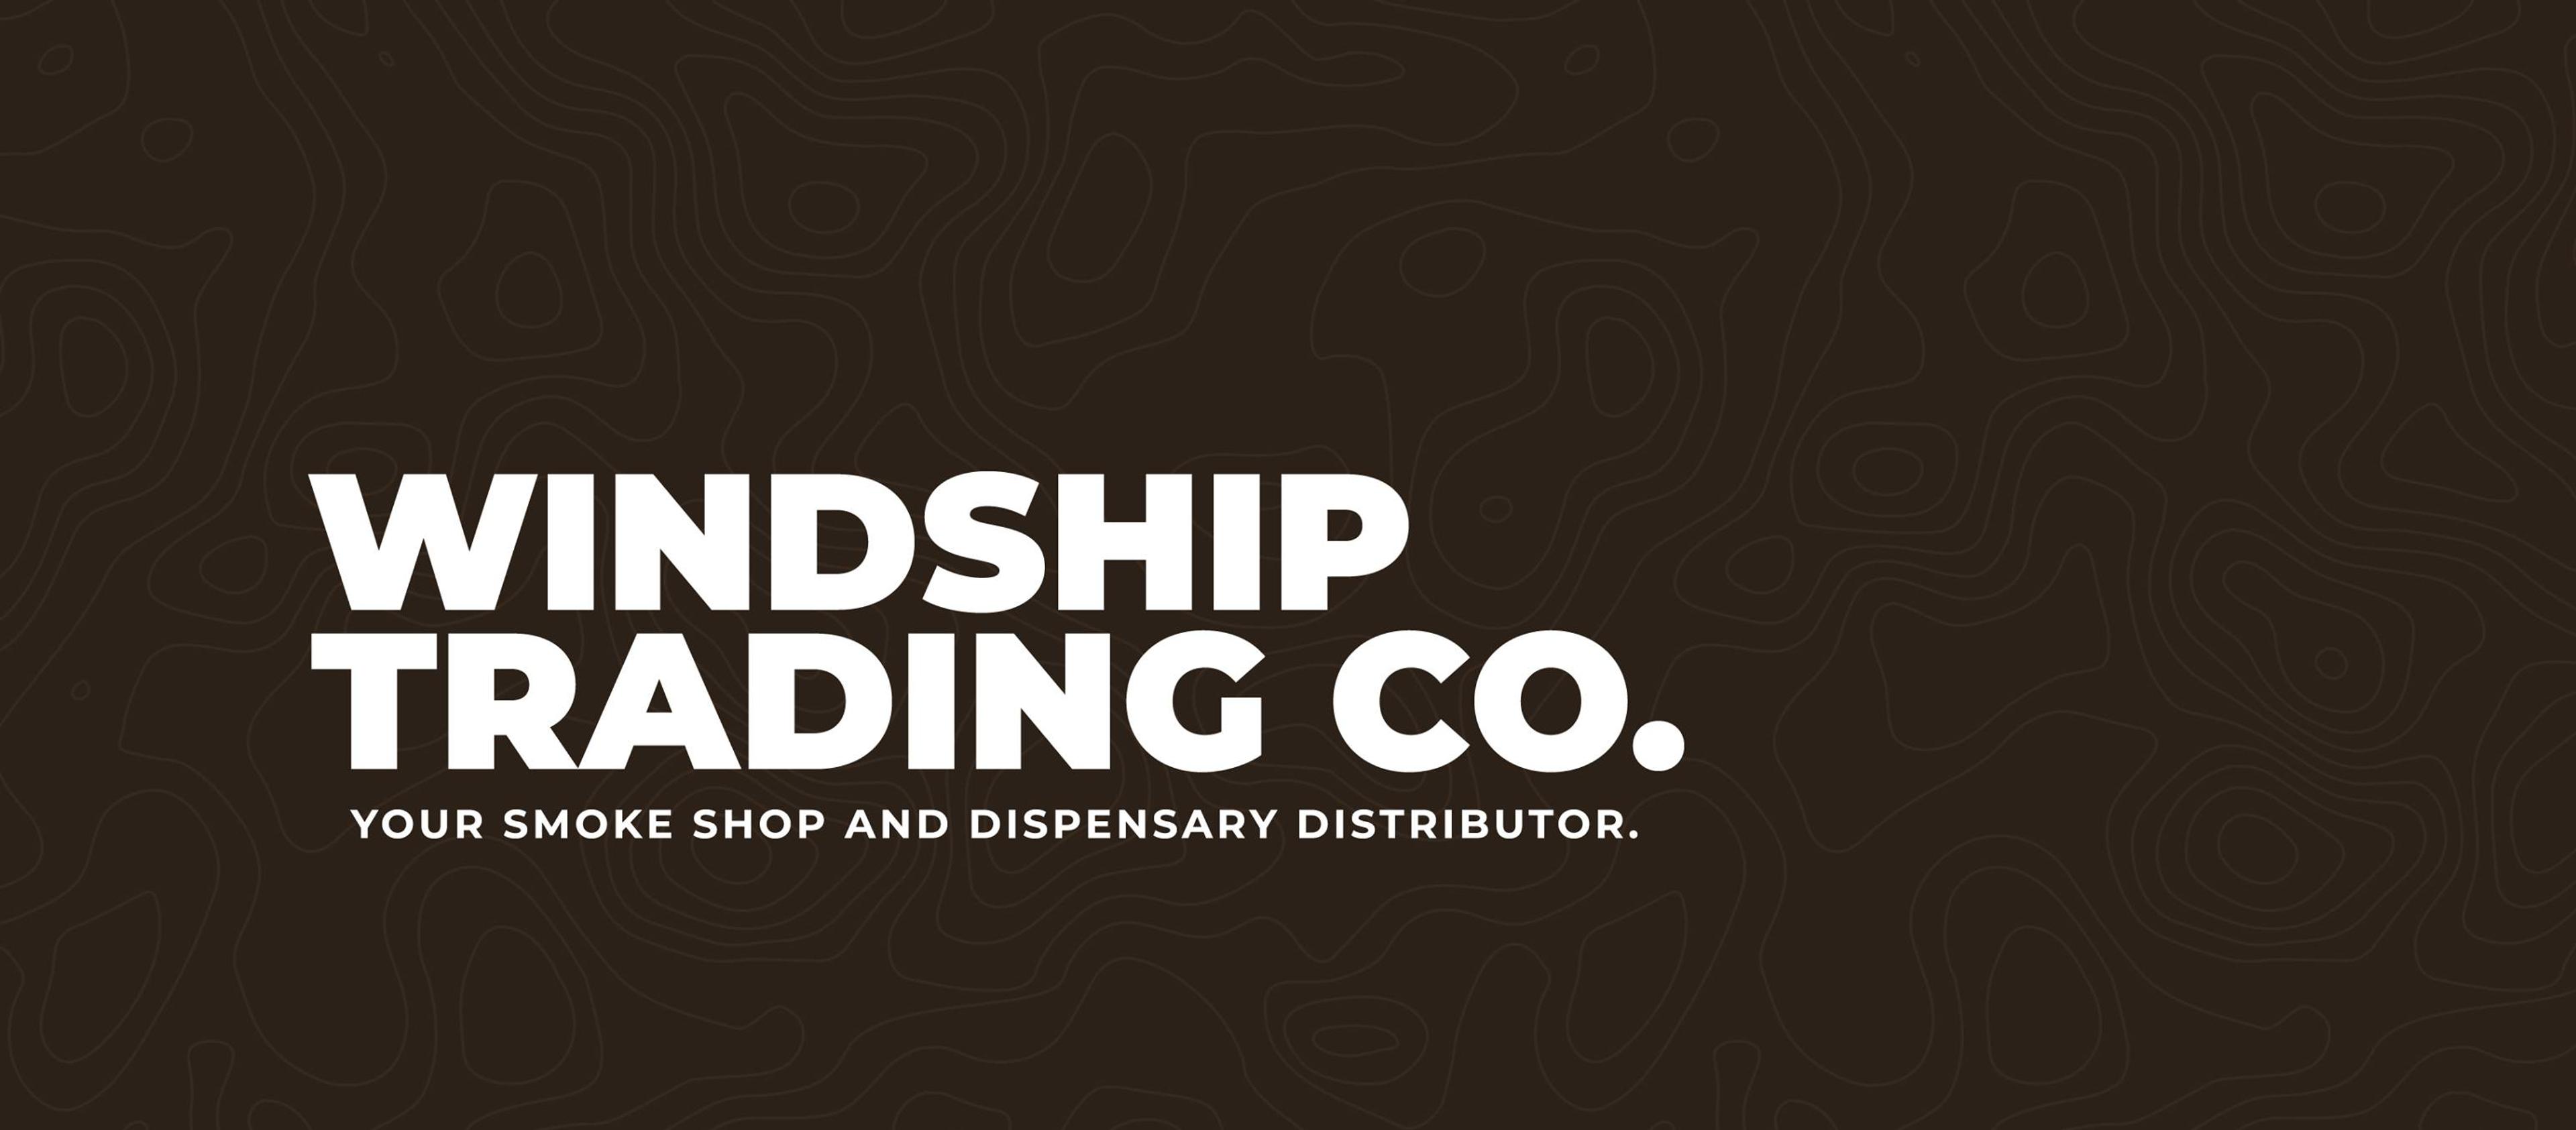 Windship Trading Co.